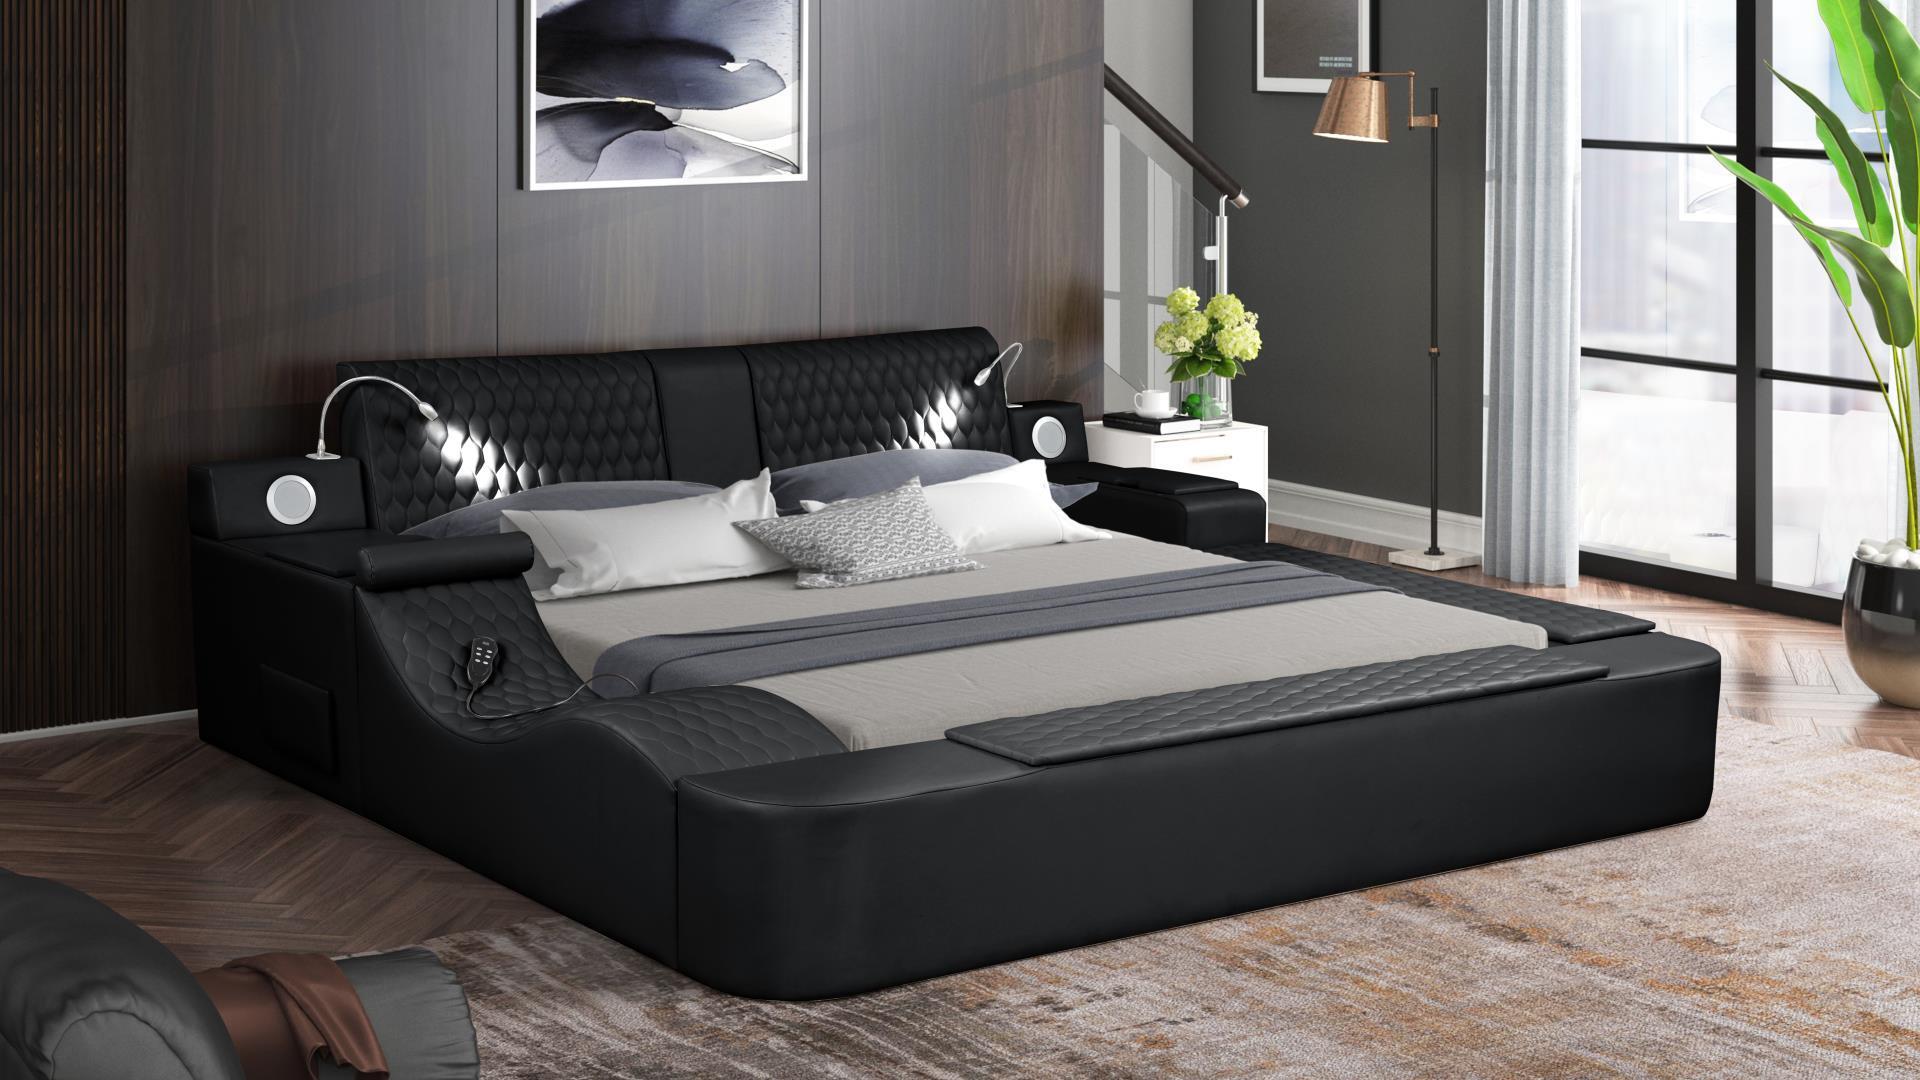 

    
Black Eco Leather Smart Multifunctional King Bed ZOYA Galaxy Home Contemporary
